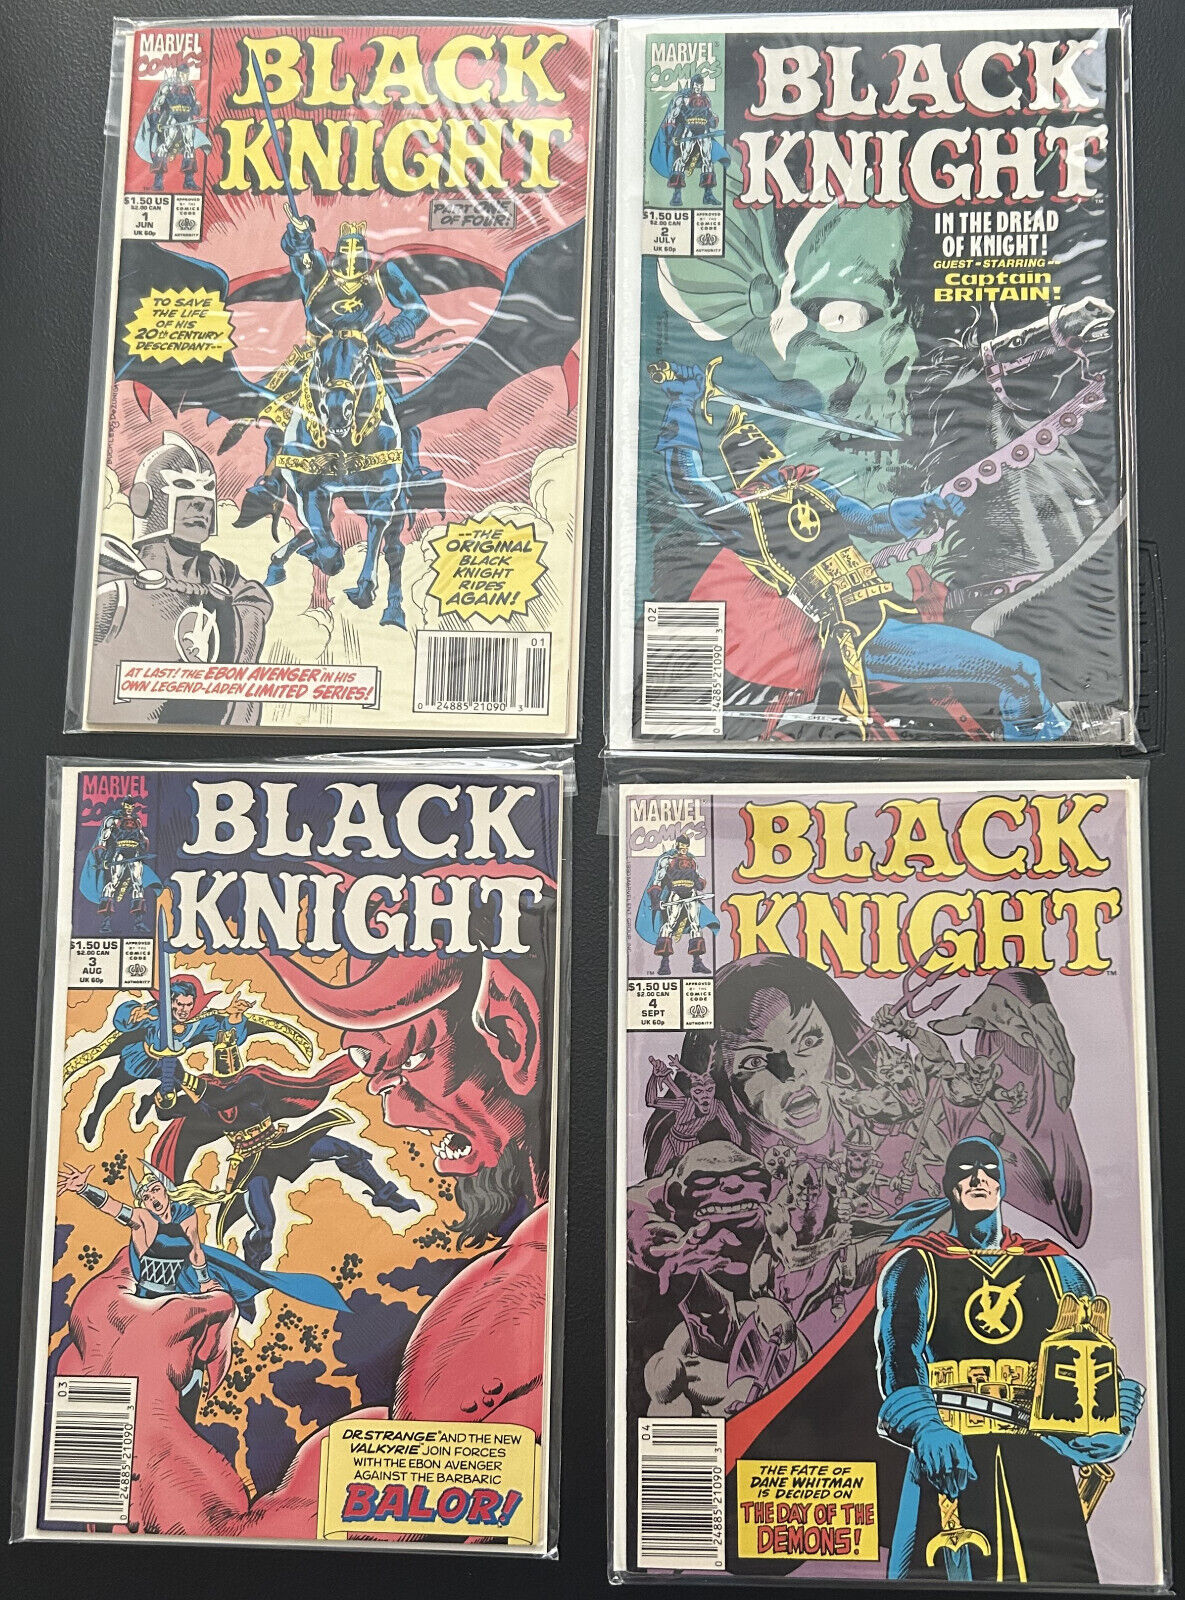 Black Knight #1-4 - Complete Limited Series - Marvel Newsstand Comics 1990 VF